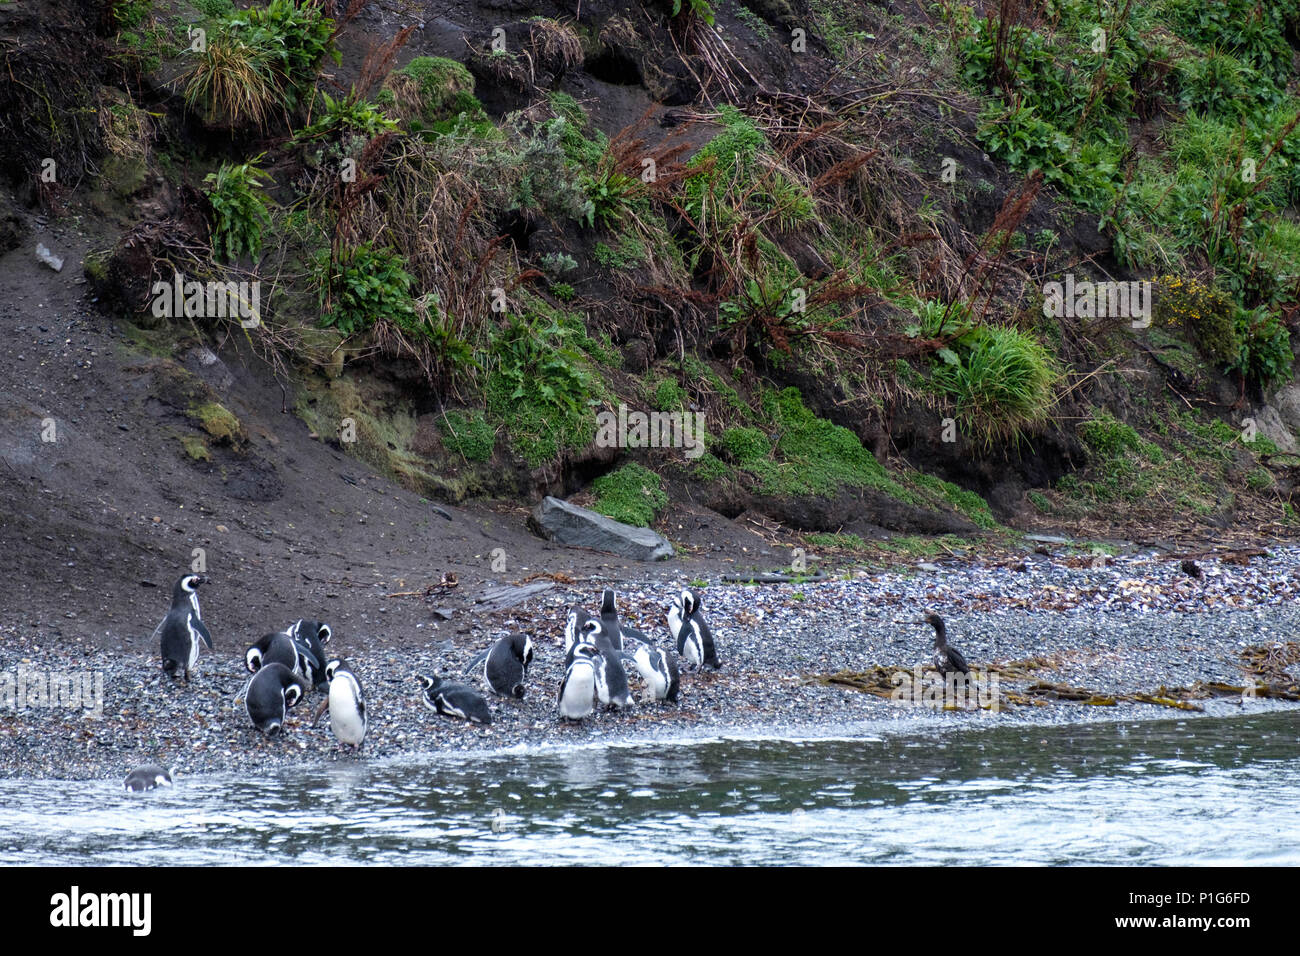 Several Magellanic penguins on an island in the Beagle Channel in Argentina. Stock Photo